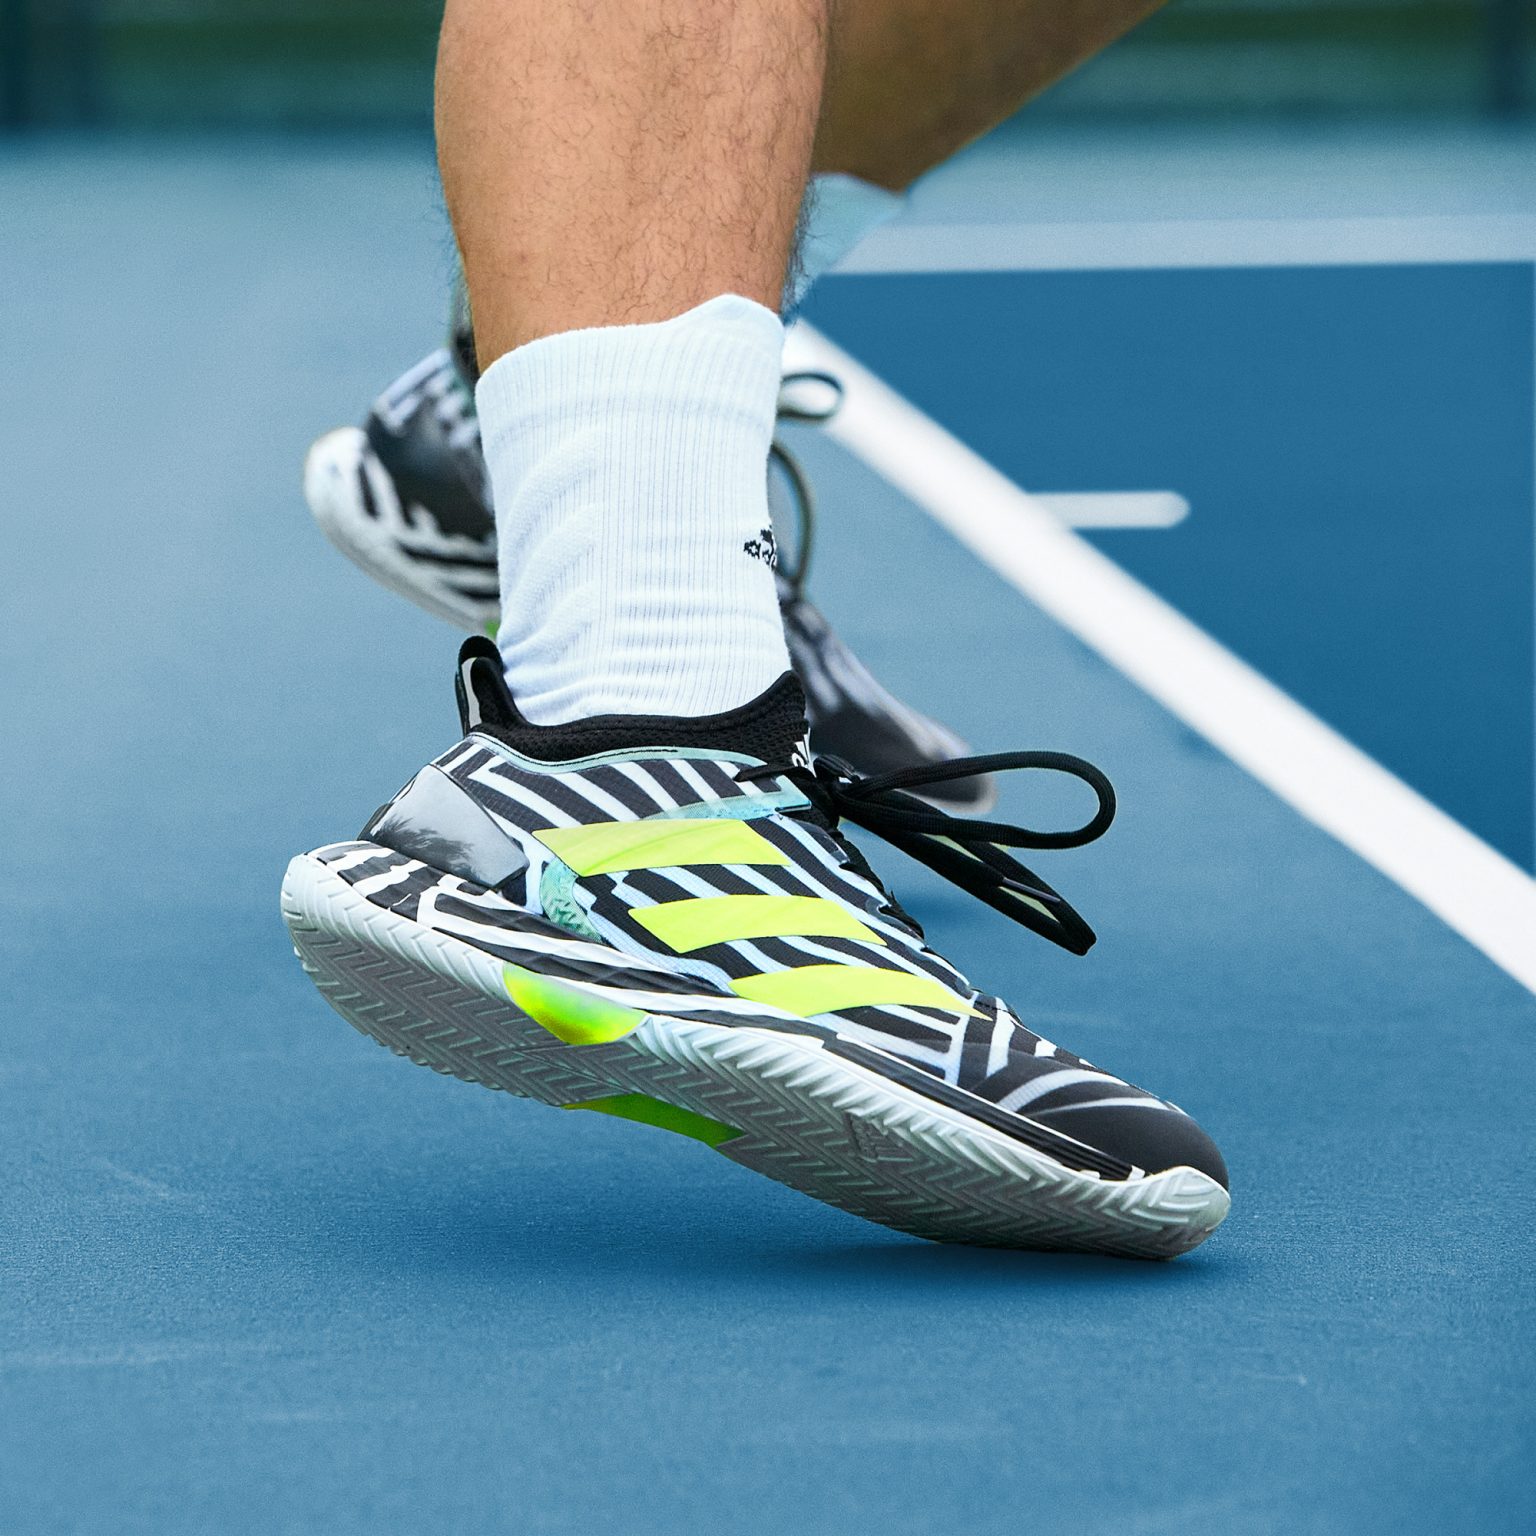 The Adidas Ubersonic 4 Tennis Shoe: What To Expect